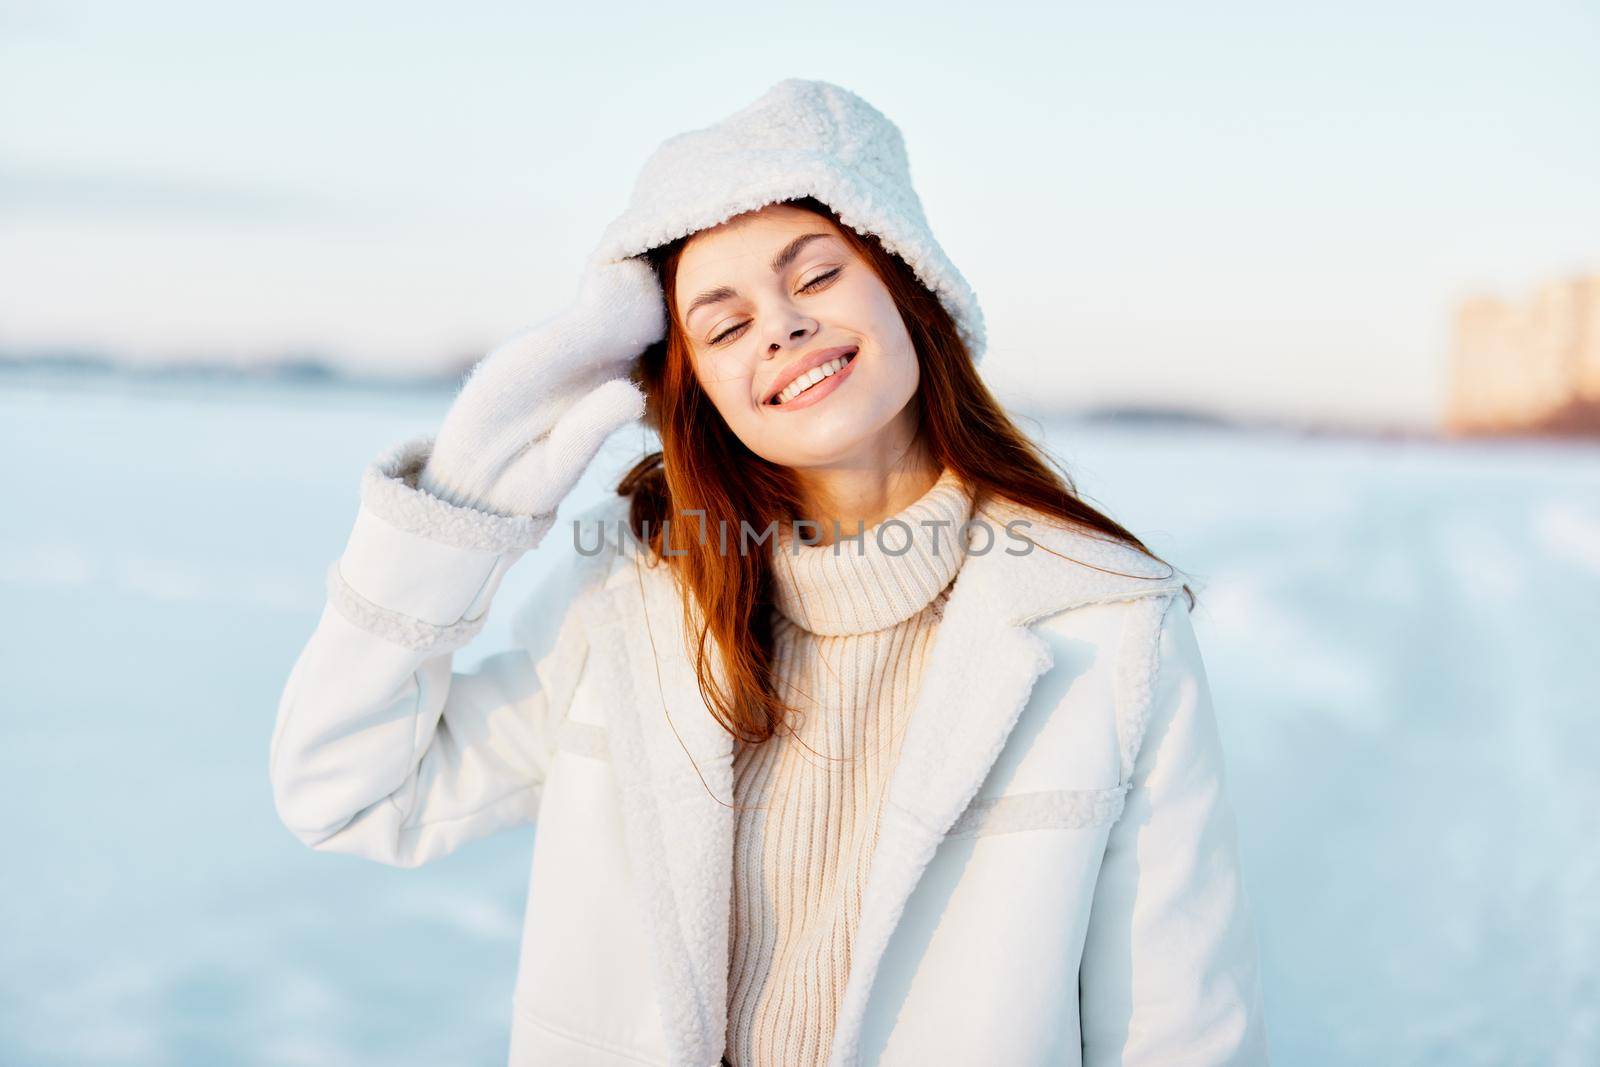 beautiful woman winter weather snow posing nature rest Fresh air by SHOTPRIME